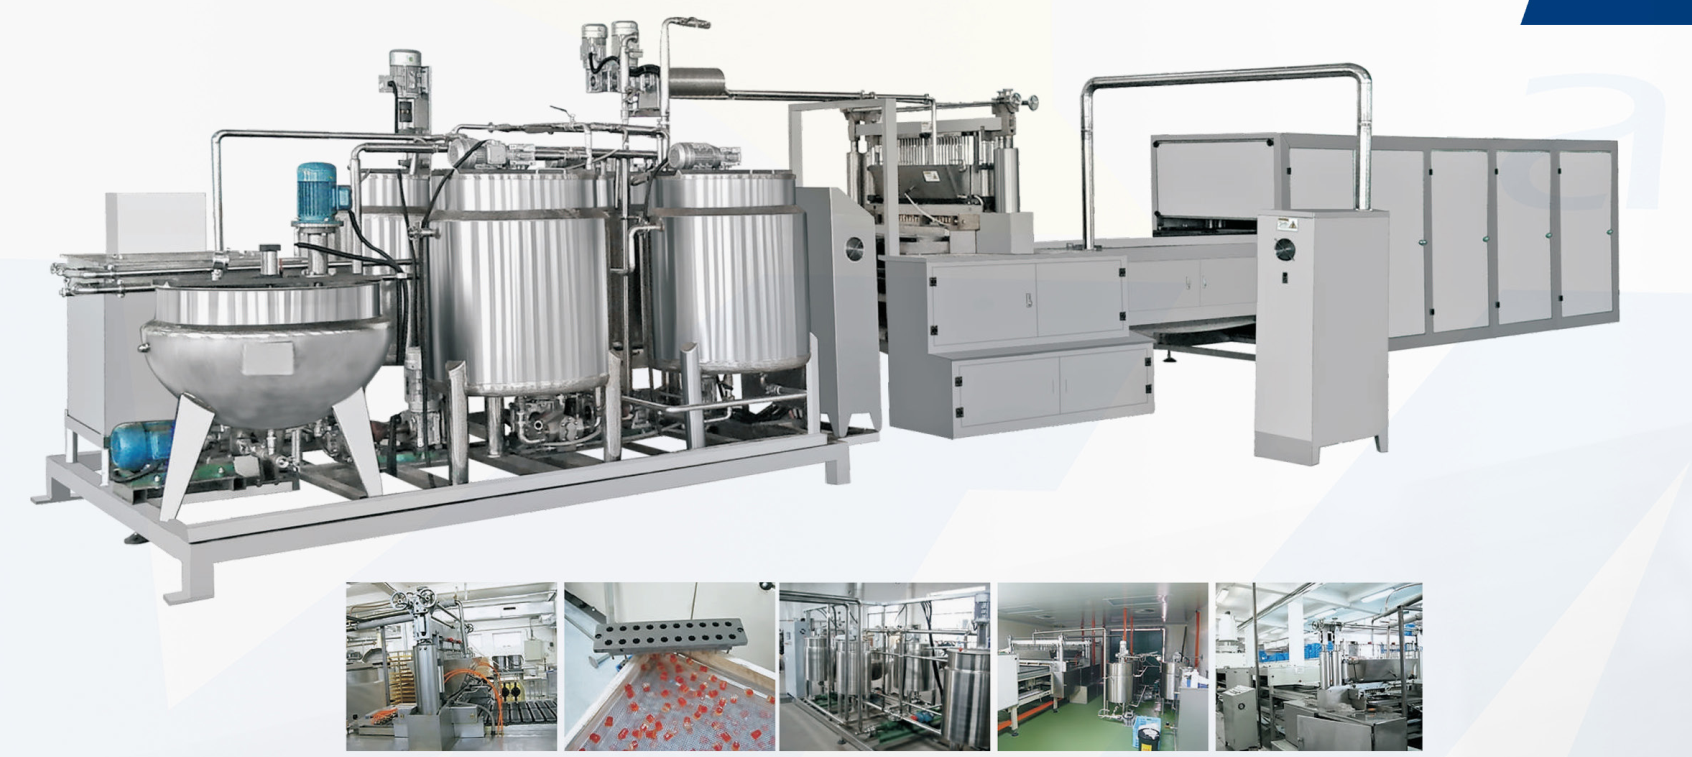 Jelly sweets production and deposit line